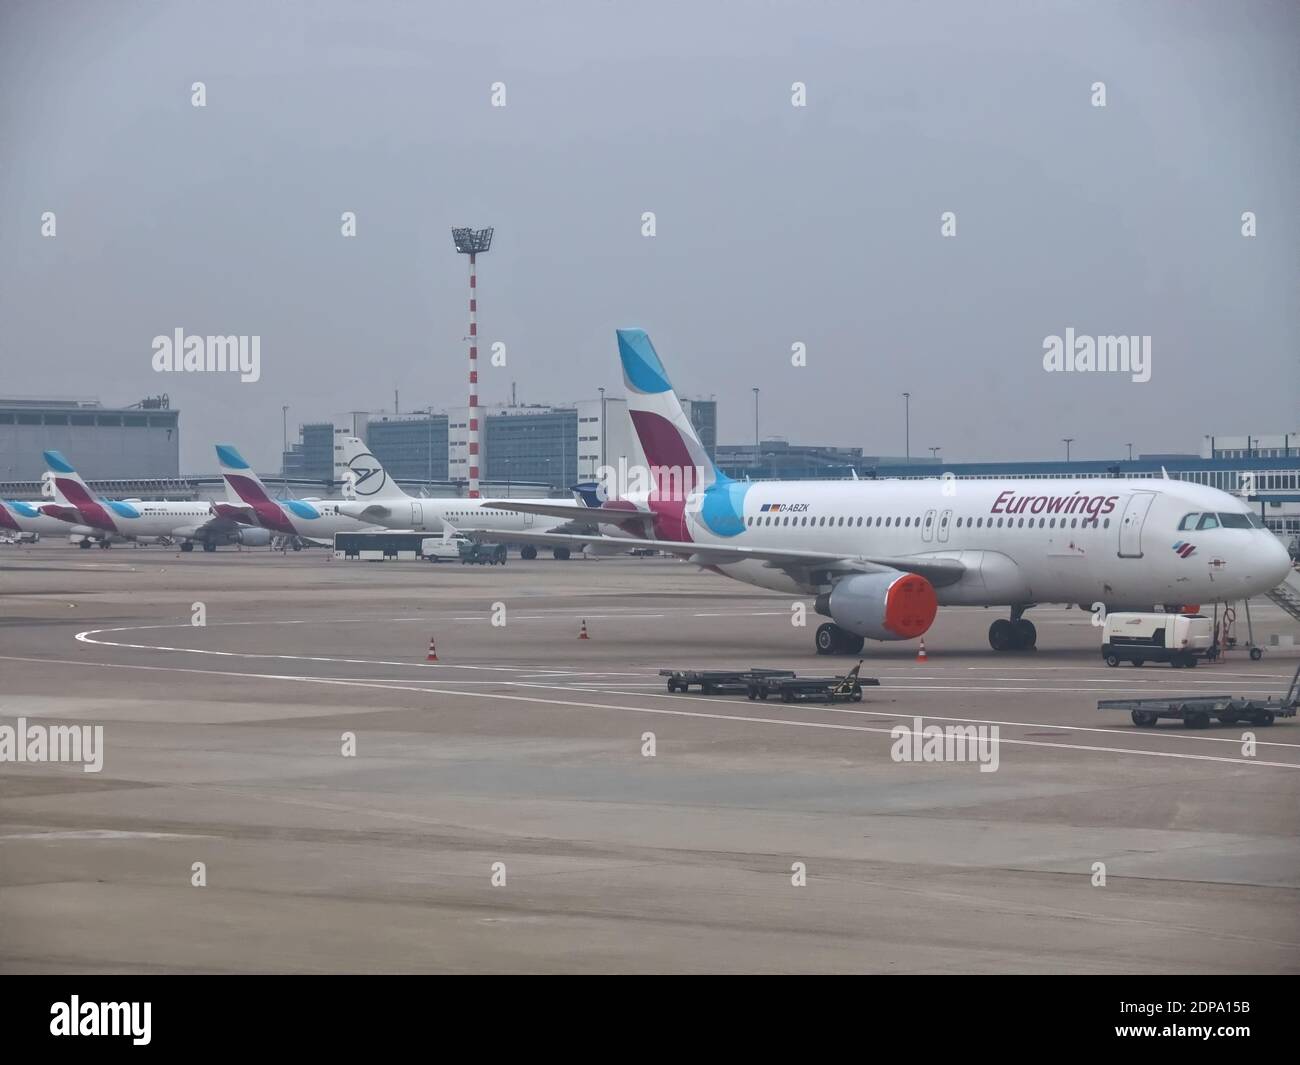 Row of Eurowings airplanes at Duesseldorf airport in park position during Covid-19 pandemic Stock Photo